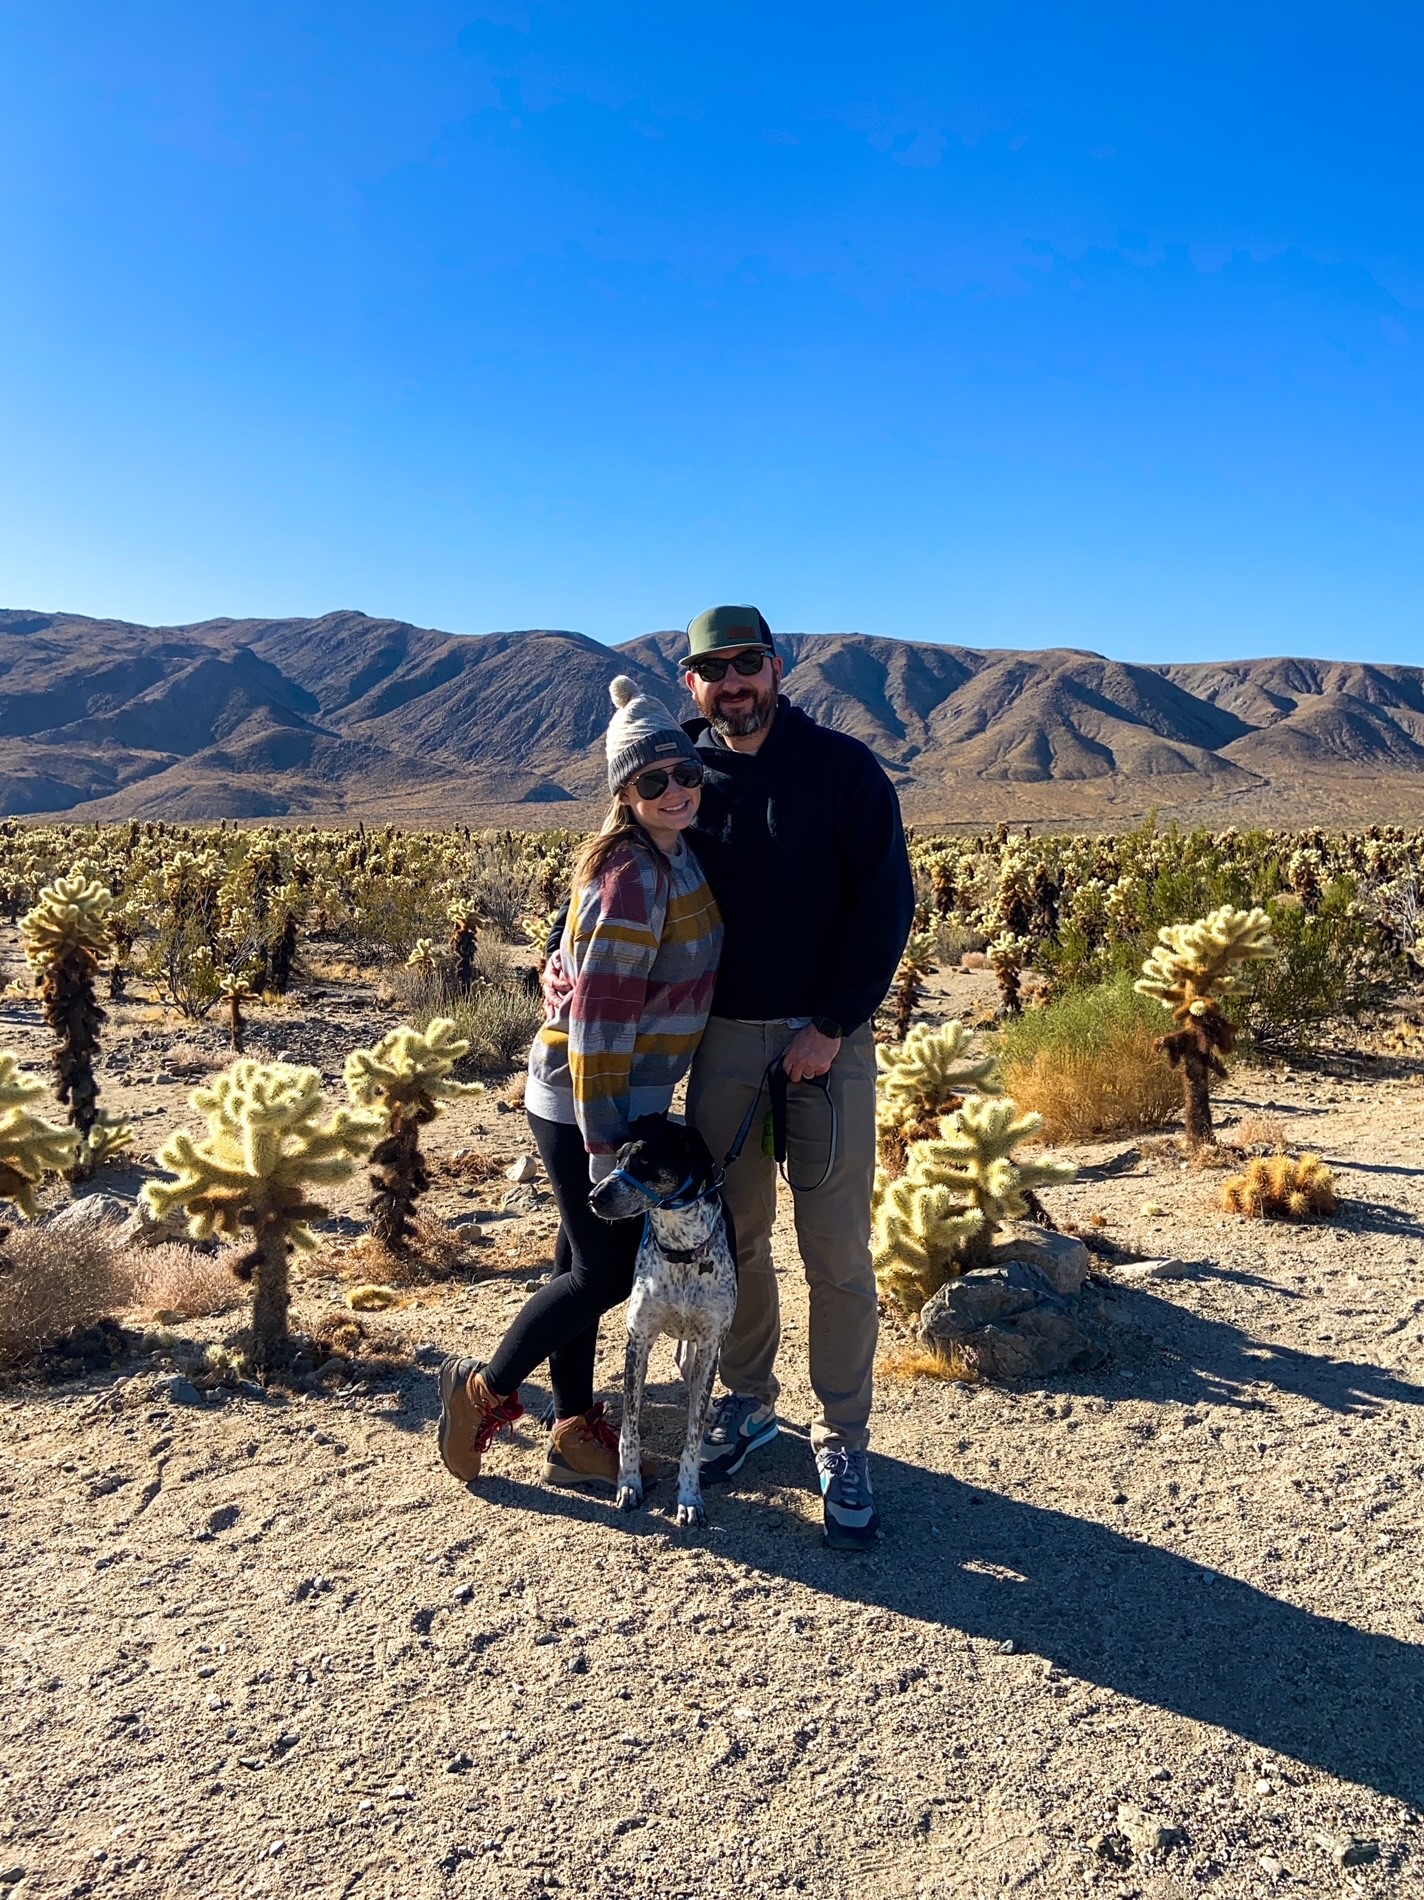 Willa Wanders and Family in the Desert